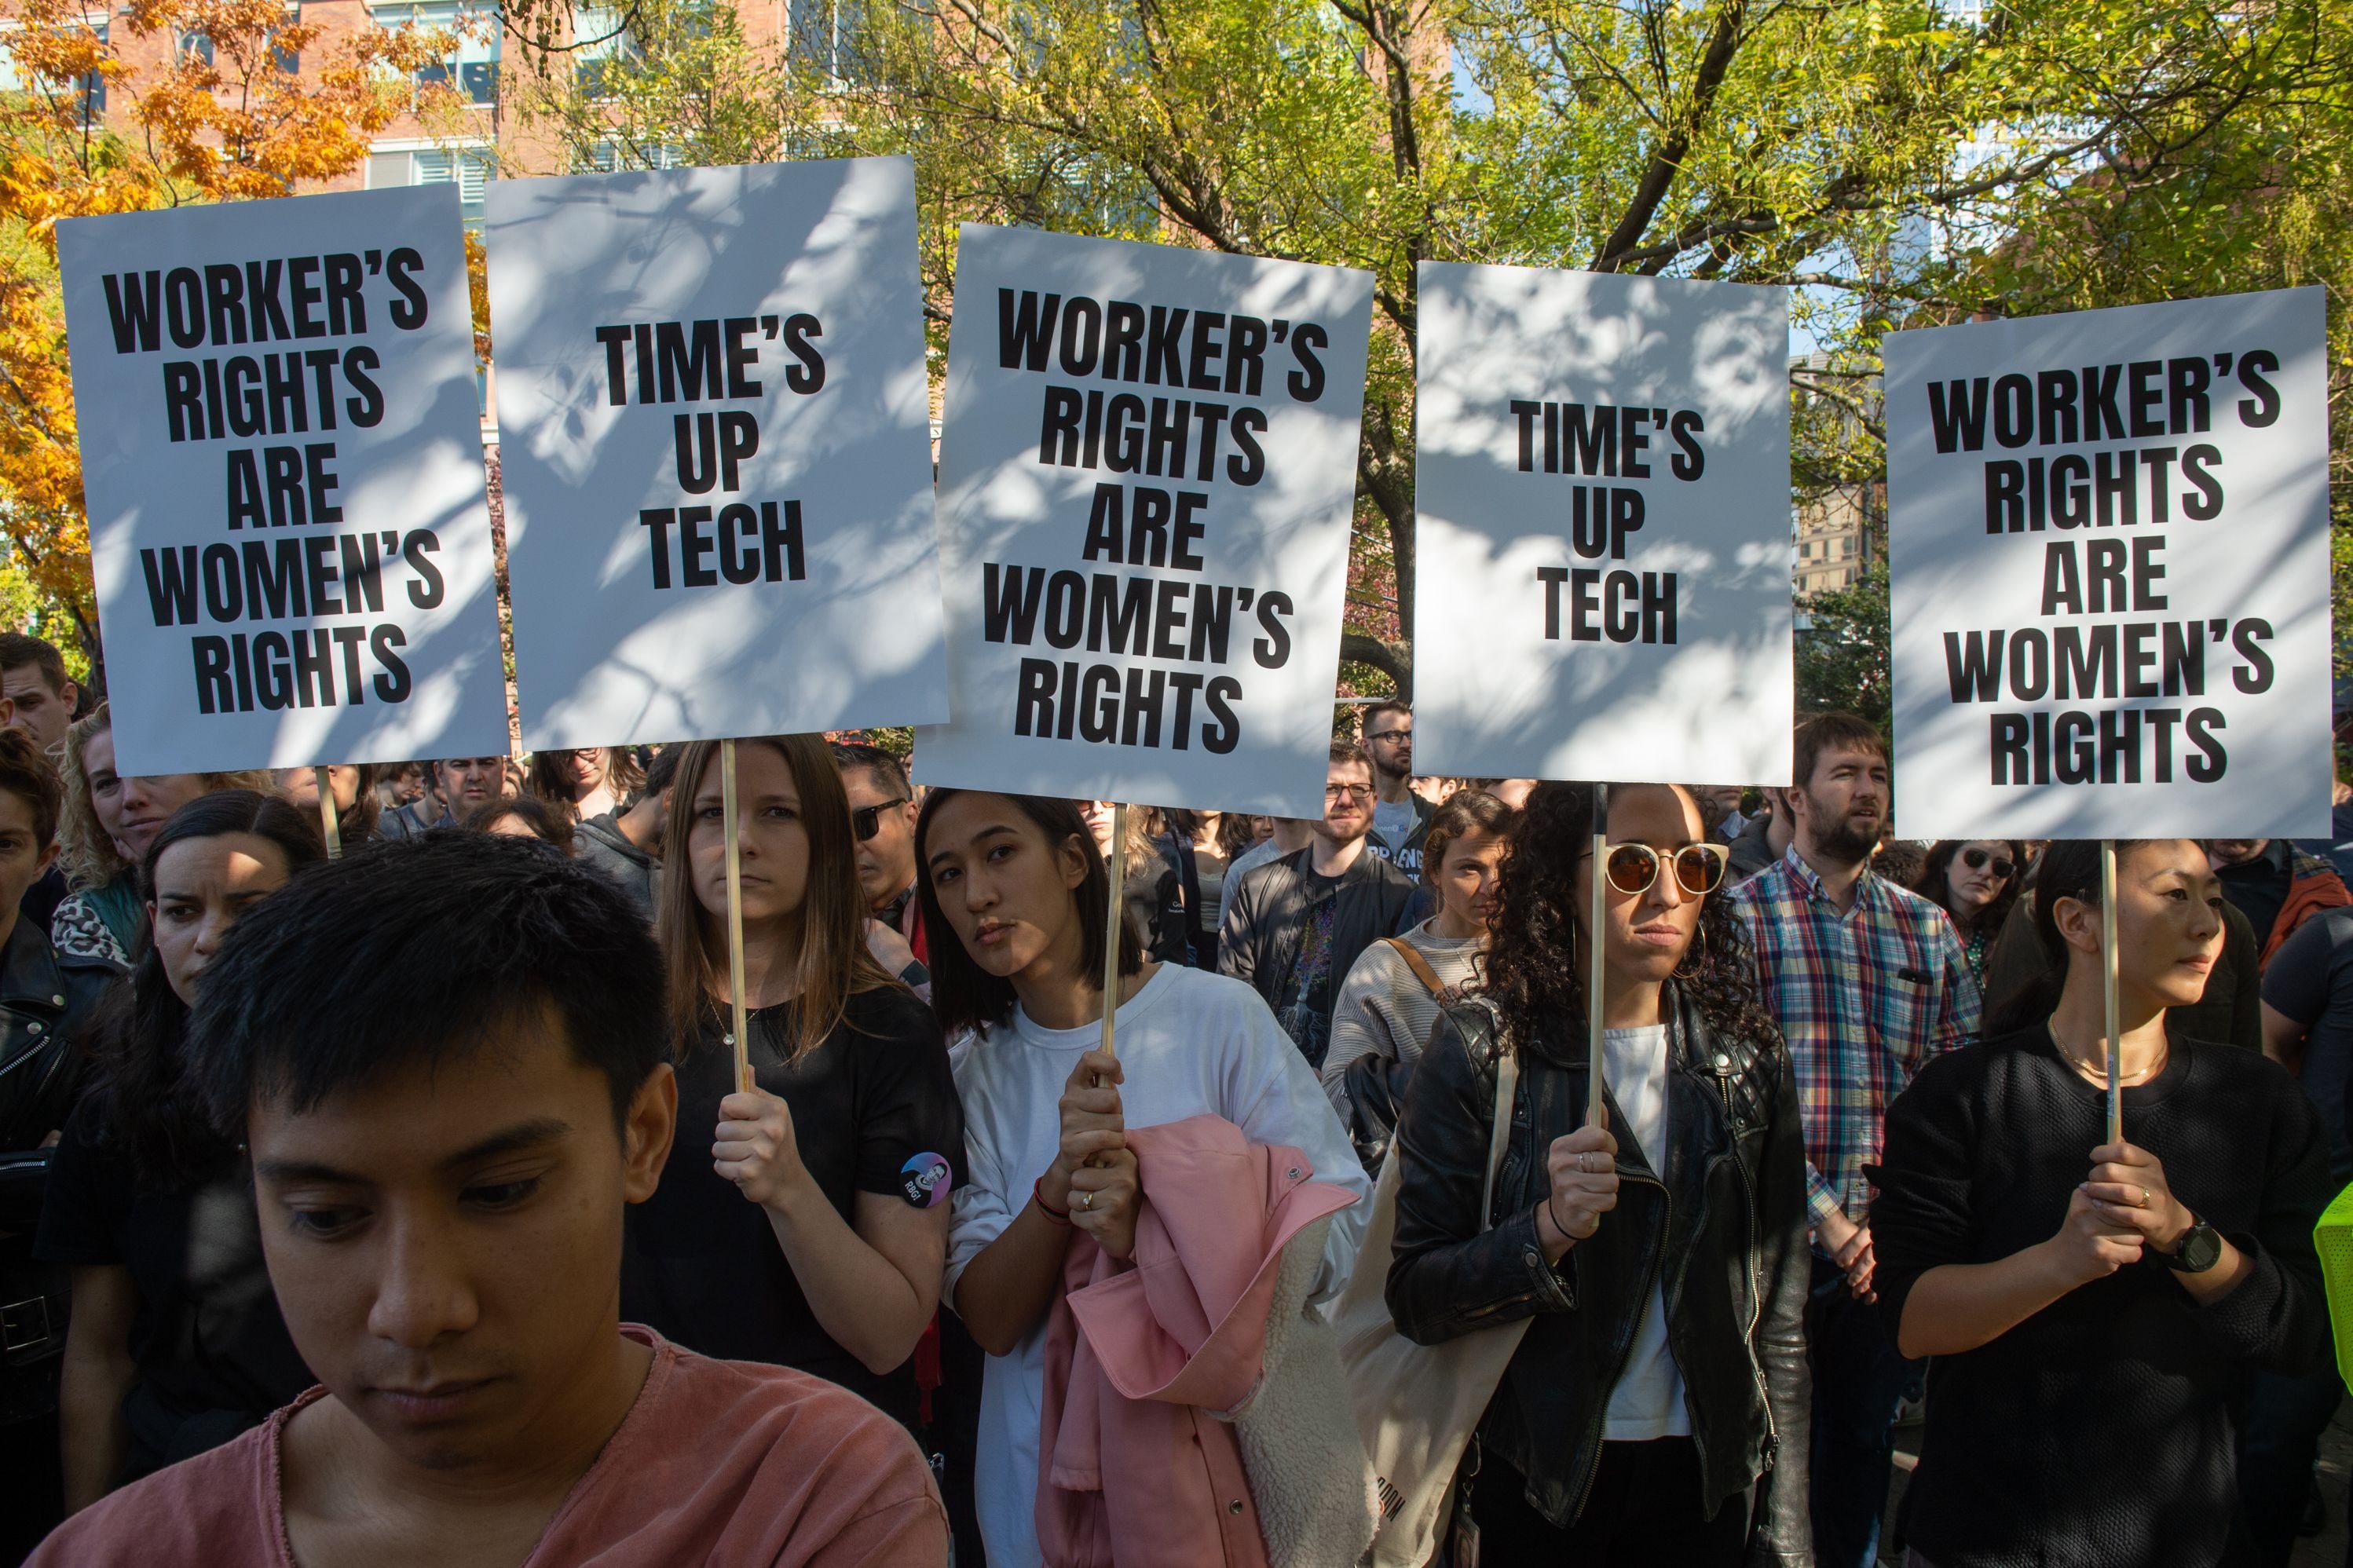 Google employees stage a walkout on November 1, 2018, in New York, over sexual harassment. - A Google Walkout For Real Change account that sprang up on Twitter on October 31 called for employees and contractors to leave their workplaces at 11:10am local time around the world on Thursday. Tension has been growing over how the US-based tech giant handles sexual harassment claims. (Photo by Bryan R. Smith / AFP)        (Photo credit should read BRYAN R. SMITH/AFP/Getty Images)